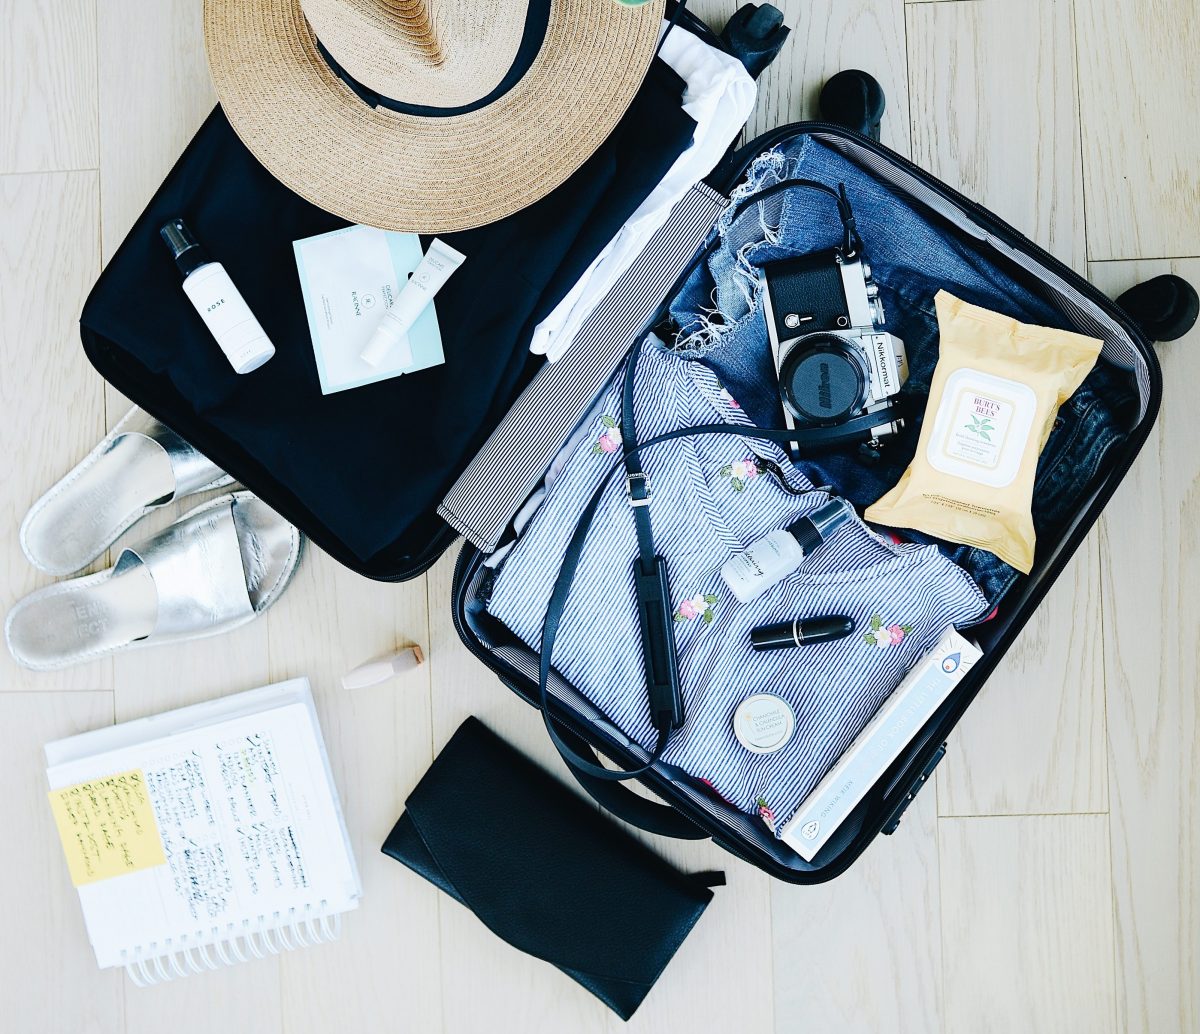 Packing tips for business travel